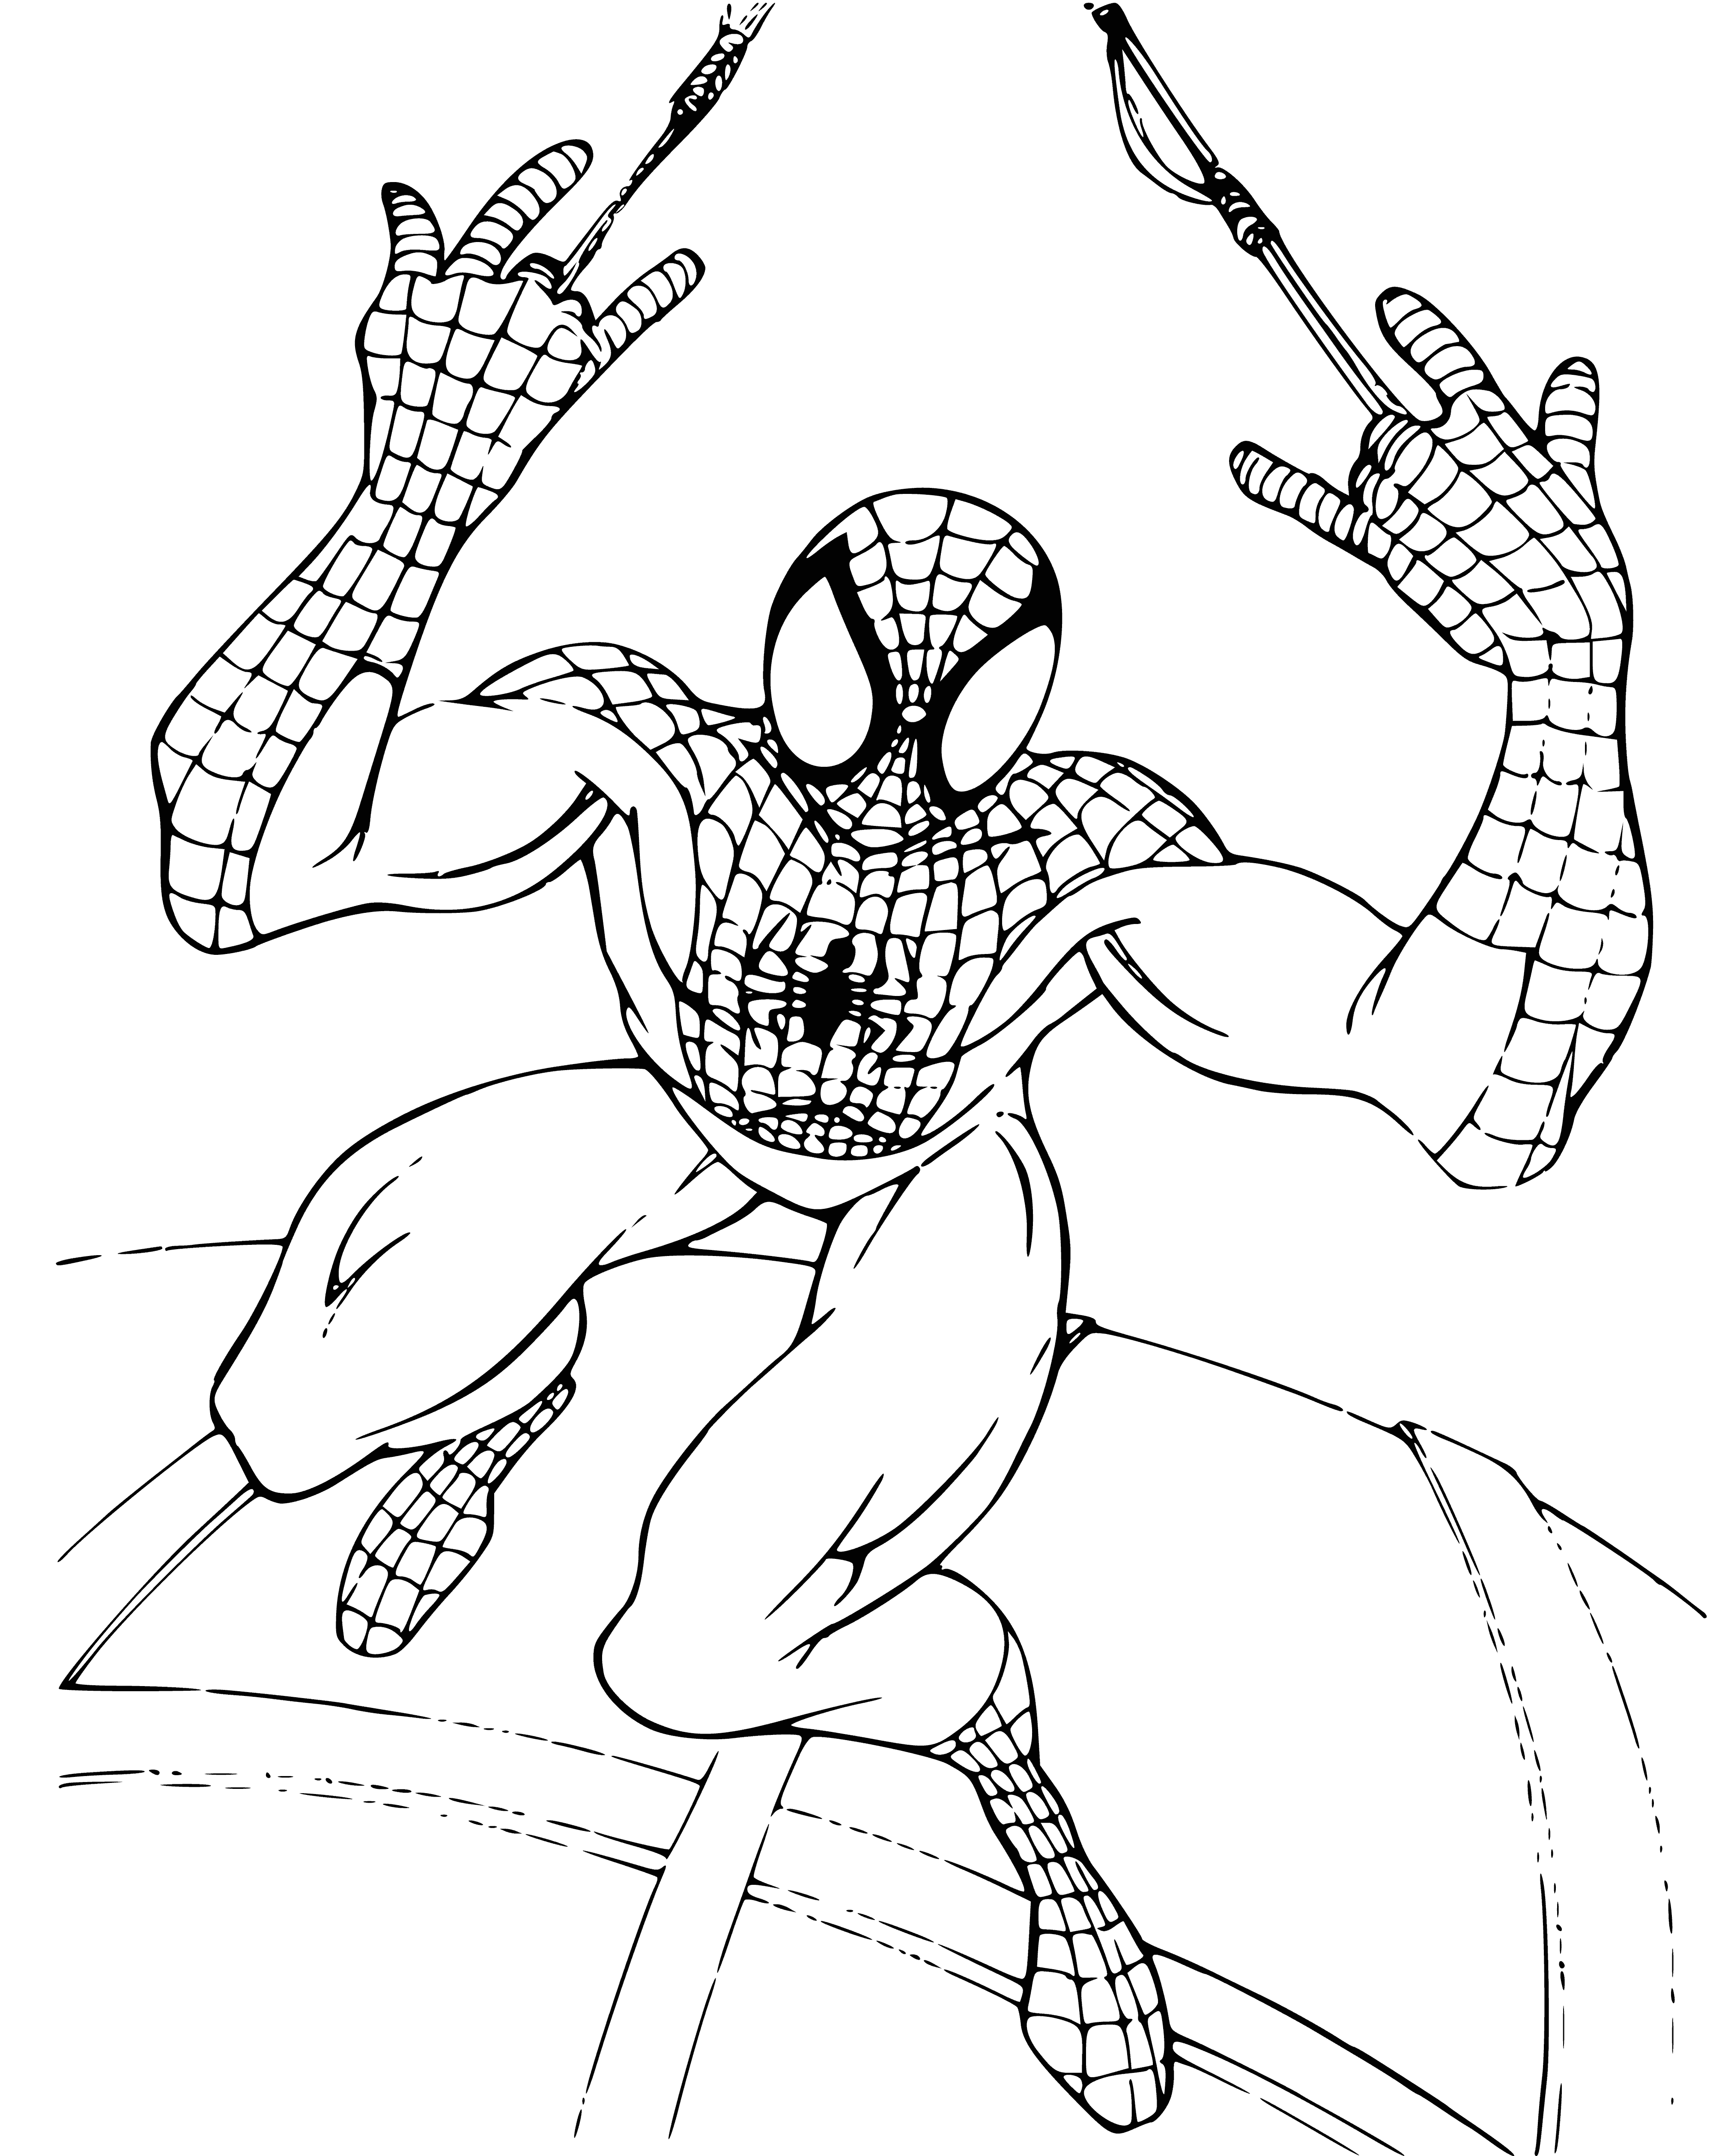 coloring page: Spider-Man in all black, swooping in with raised fist, ready to fight evil! #marvel #superhero